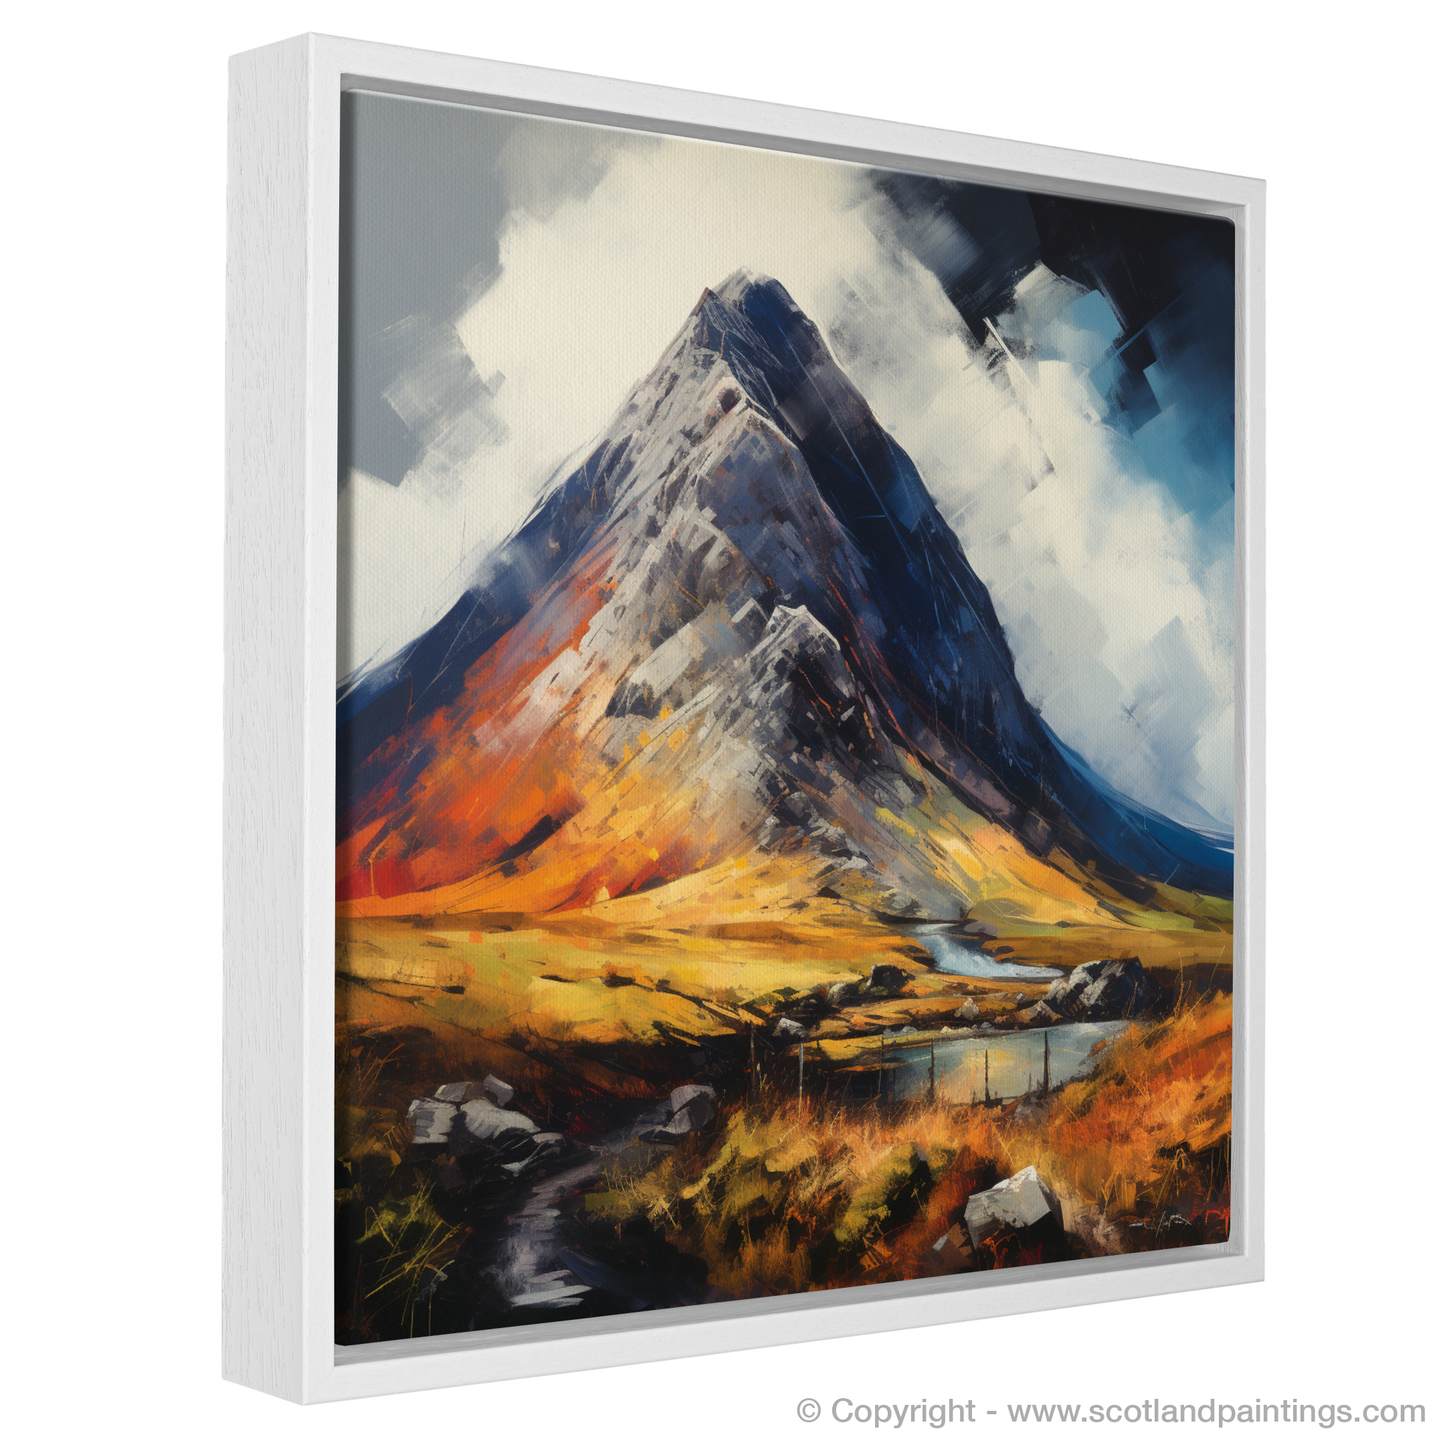 Painting and Art Print of Stob Dubh (Buachaille Etive Beag) entitled "Majestic Stob Dubh: An Expressionist Tribute to the Scottish Highlands".